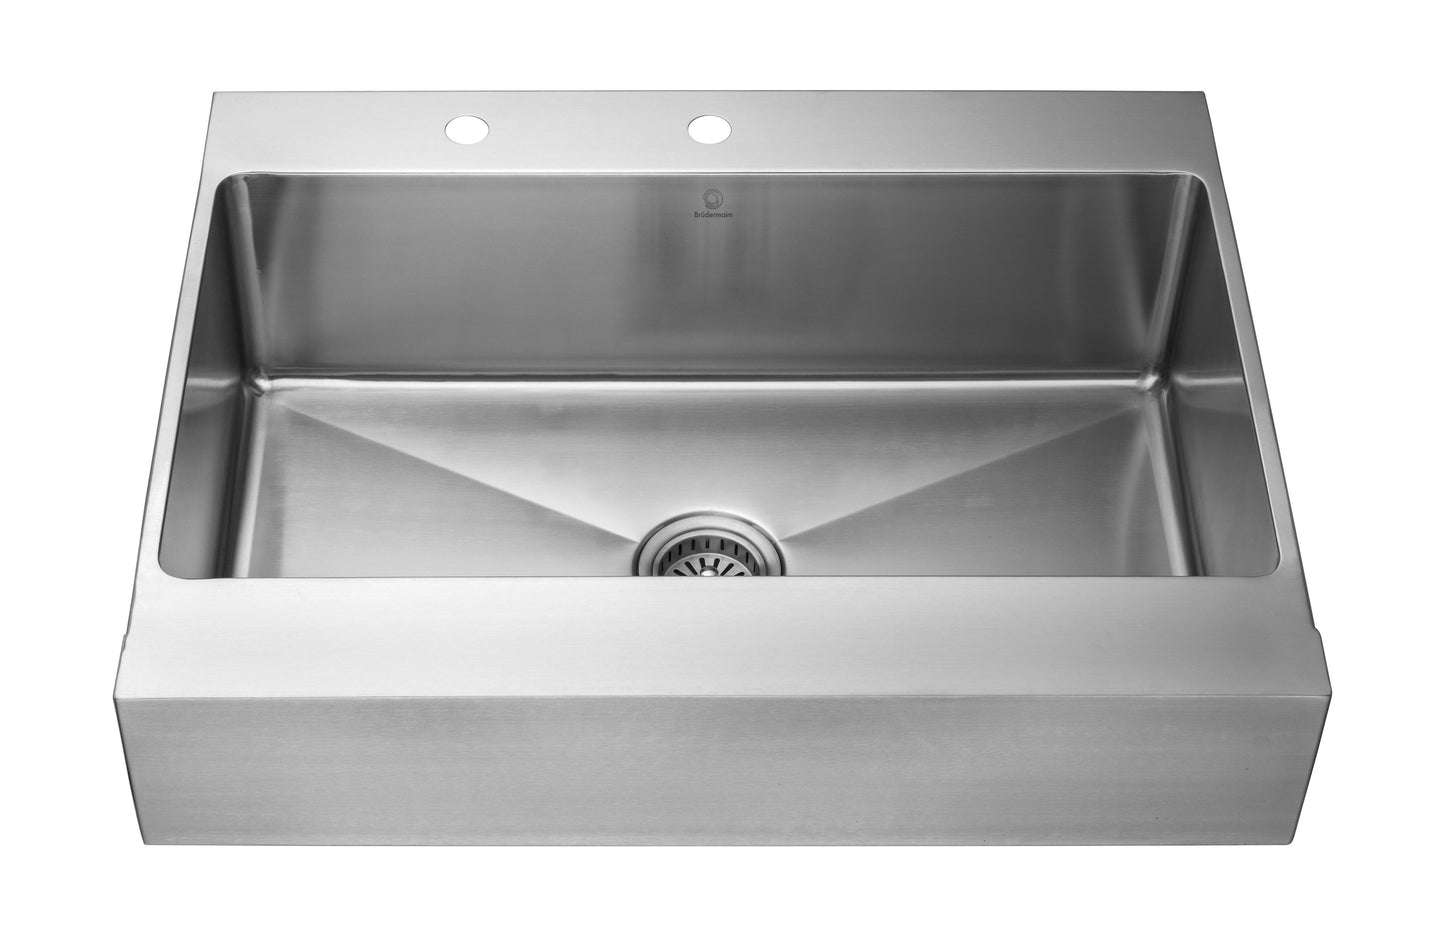 6pcs combo - Kitchen Sink - Stainless Steel - BRUDERMAIM 32x25x9  Inch 16 gauge Handcrafted T304 Stainless Steel Farmhouse Apron Kitchen Sink Single Bowl.